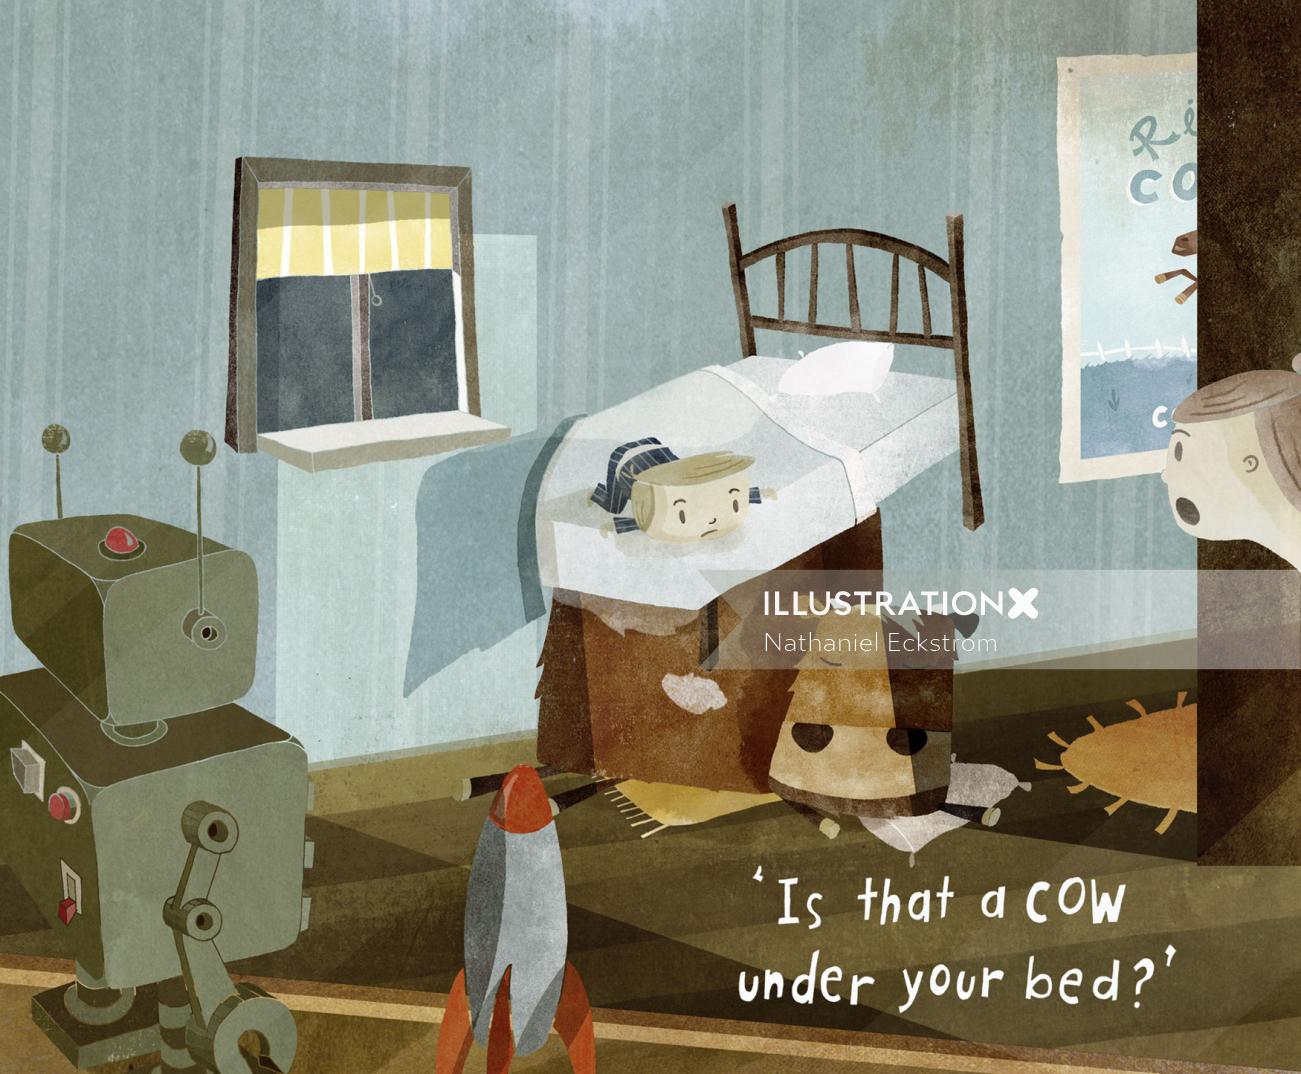 Children's illustration of cow under the bed